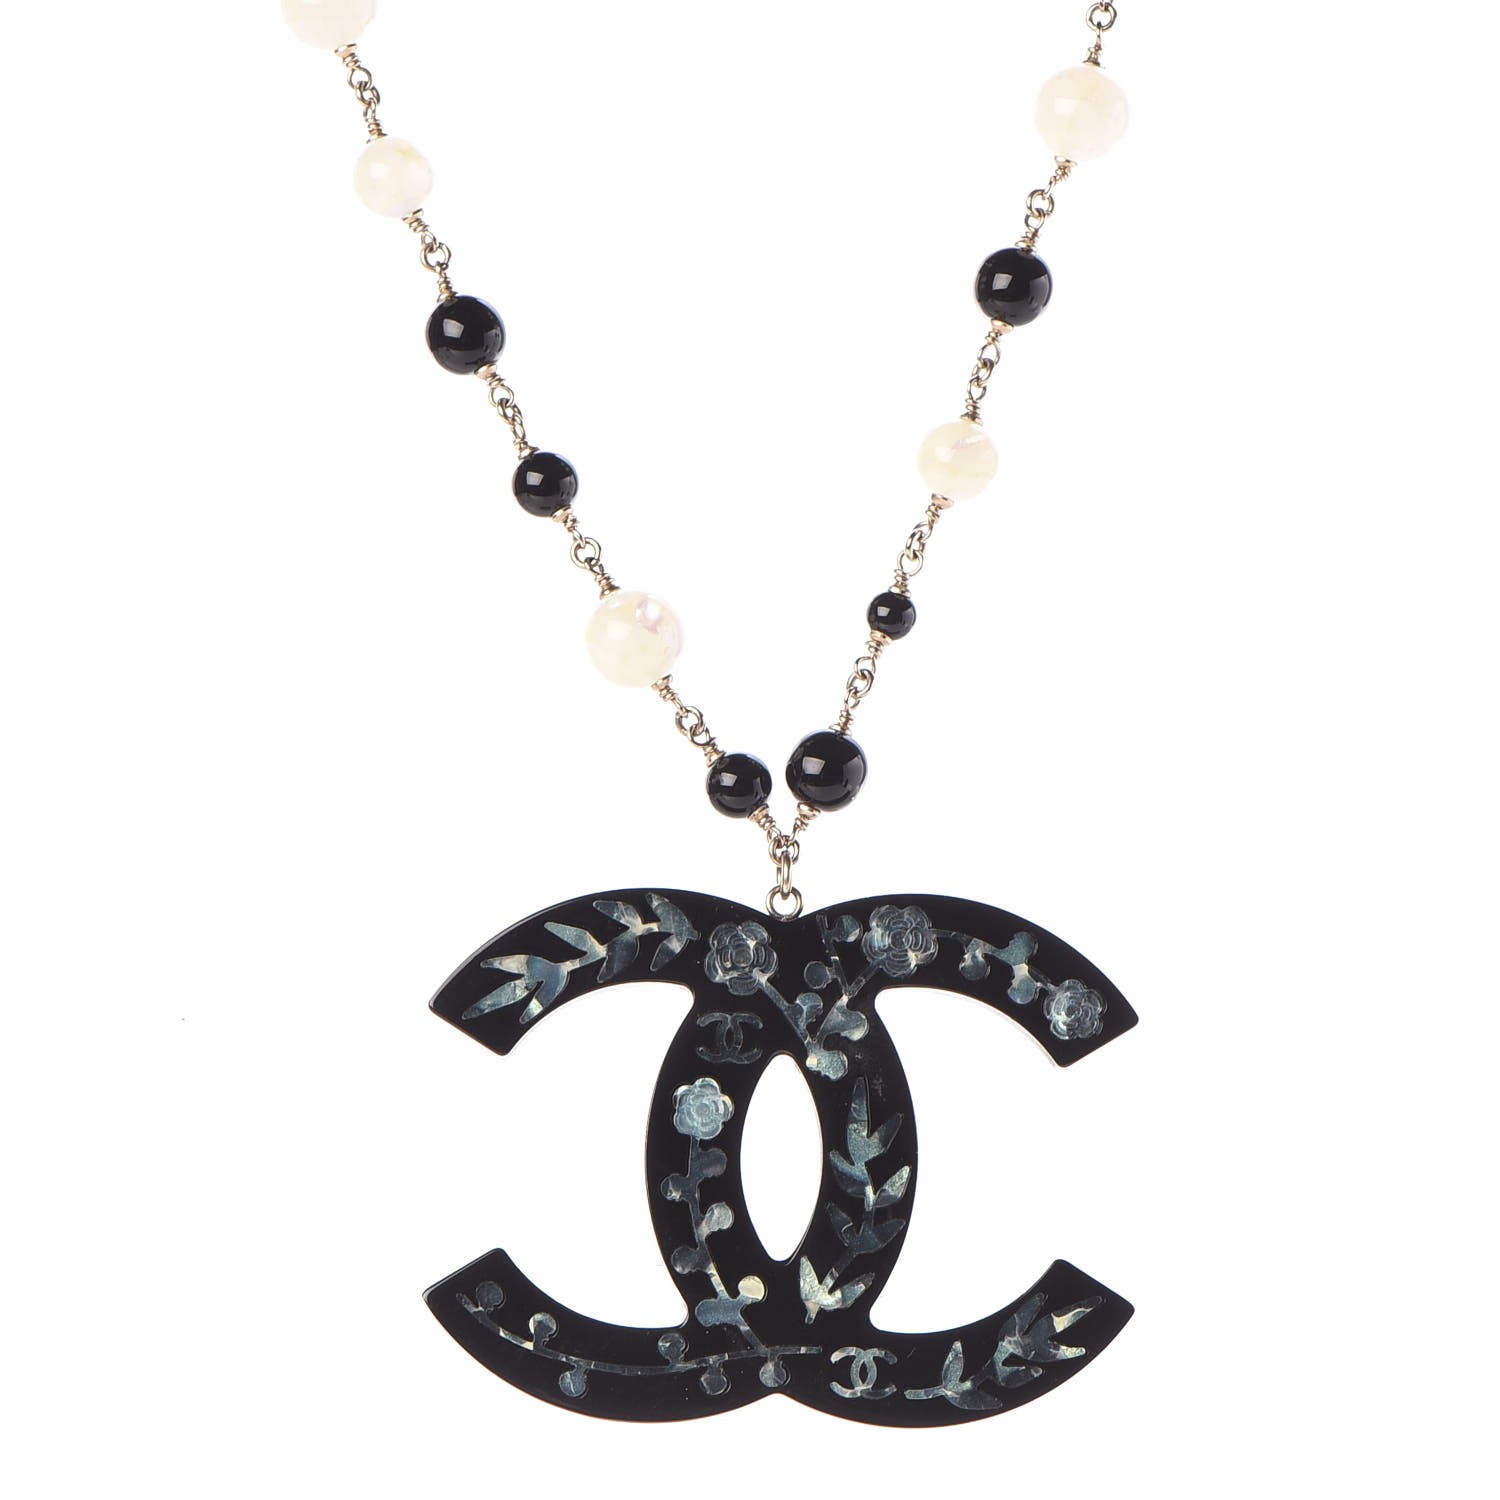 CHANEL Beaded Mother of Pearl Oversized CC Necklace 328556